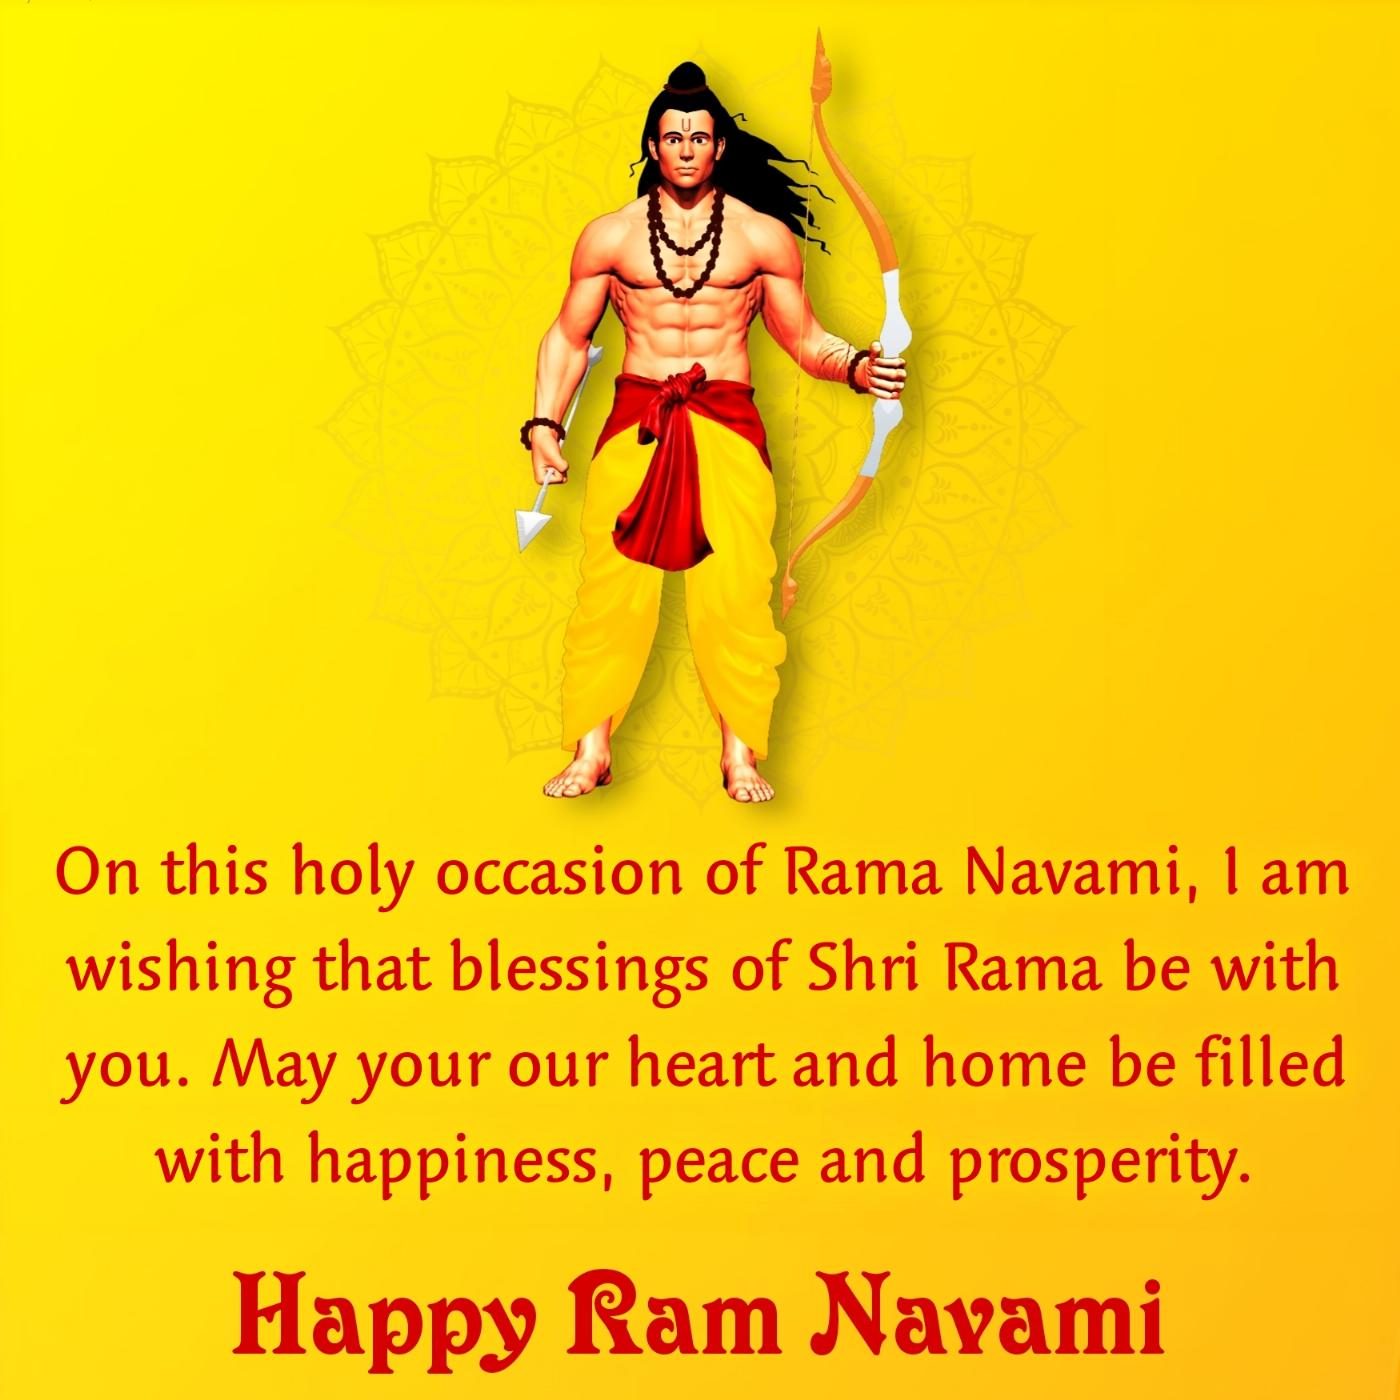 On this holy occasion of Rama Navami I am wishing